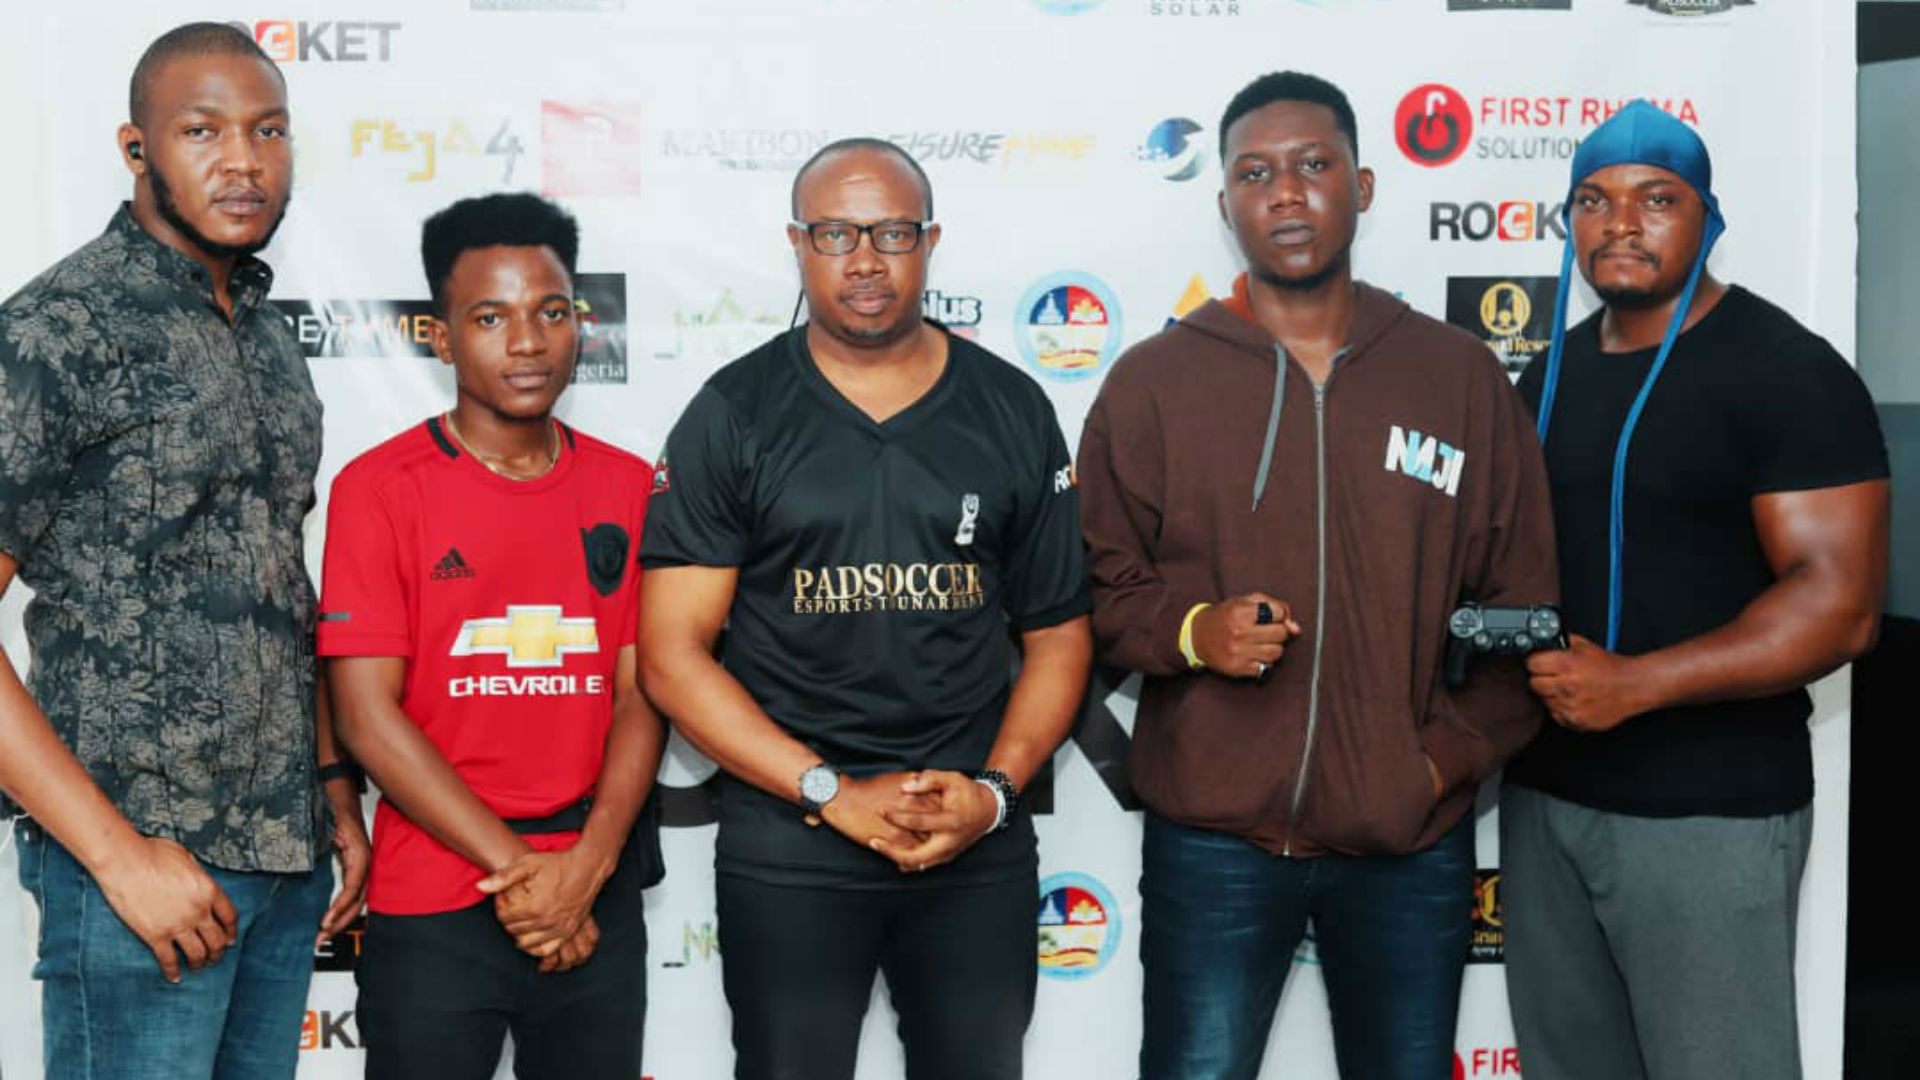 Padsoccer esports tournament dreams bigger after inspiring Lagos qualifiers